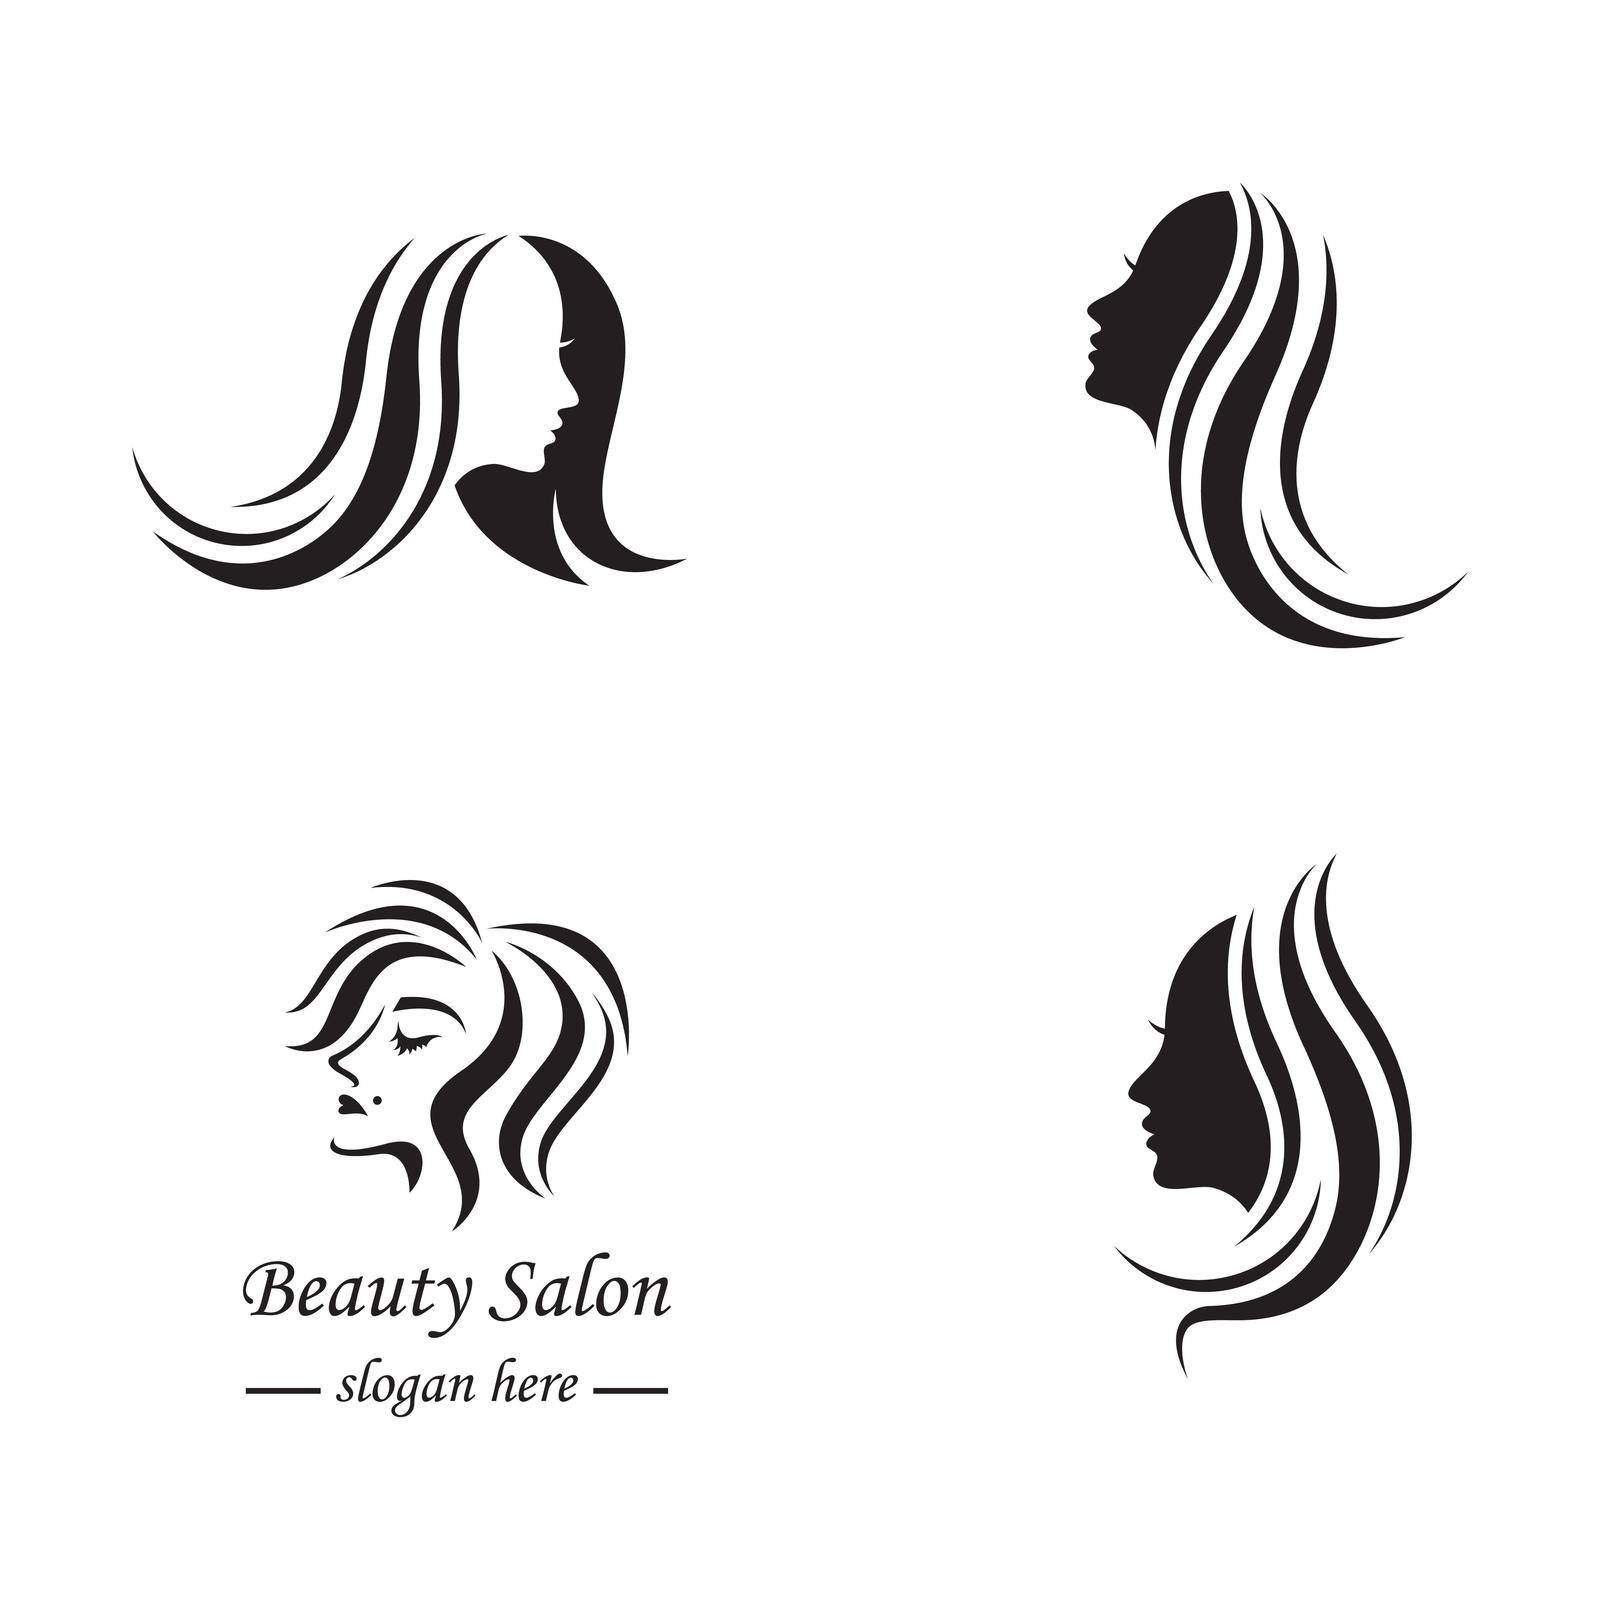 Beauty hair and salon logo by Fat17